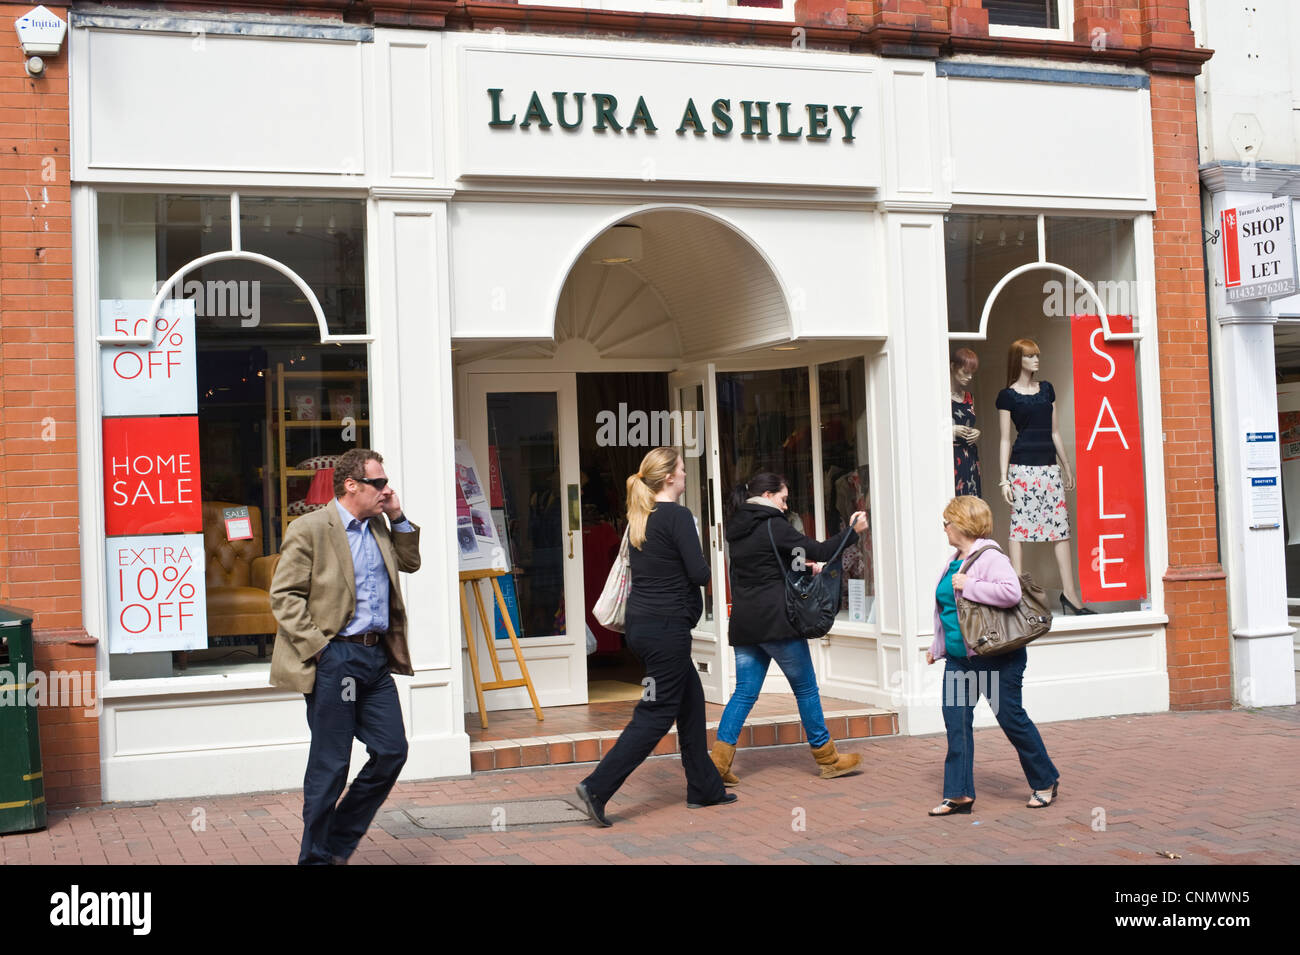 Exterior of LAURA ASHLEY shop in city centre of Hereford Herefordshire England UK Stock Photo